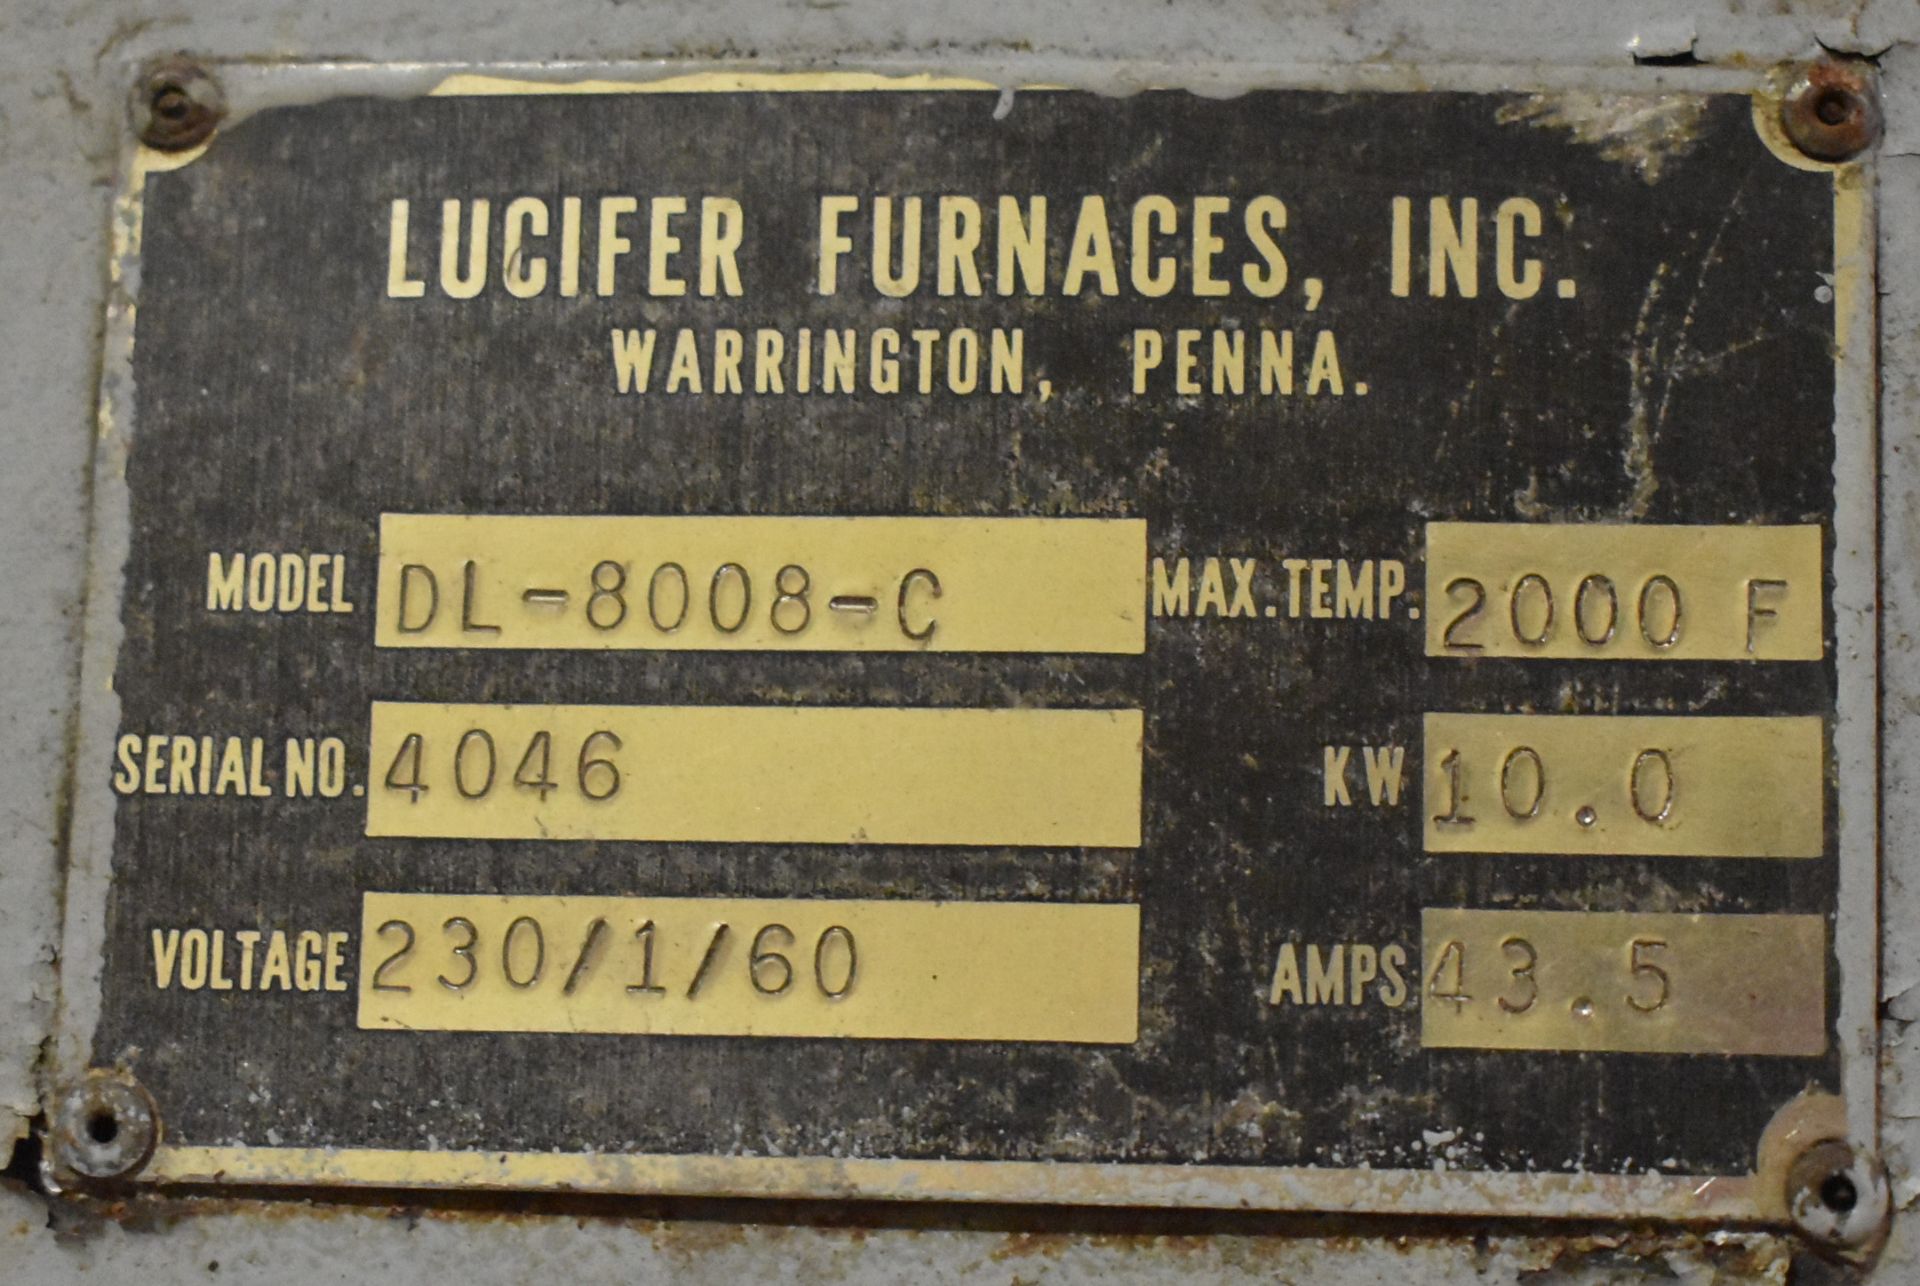 LUCIFER DL-8008-C ELECTRIC BOX FURNACE WITH 2000 DEG. F. MAX. TEMPERATURE, 10 KW, DUAL - Image 5 of 5